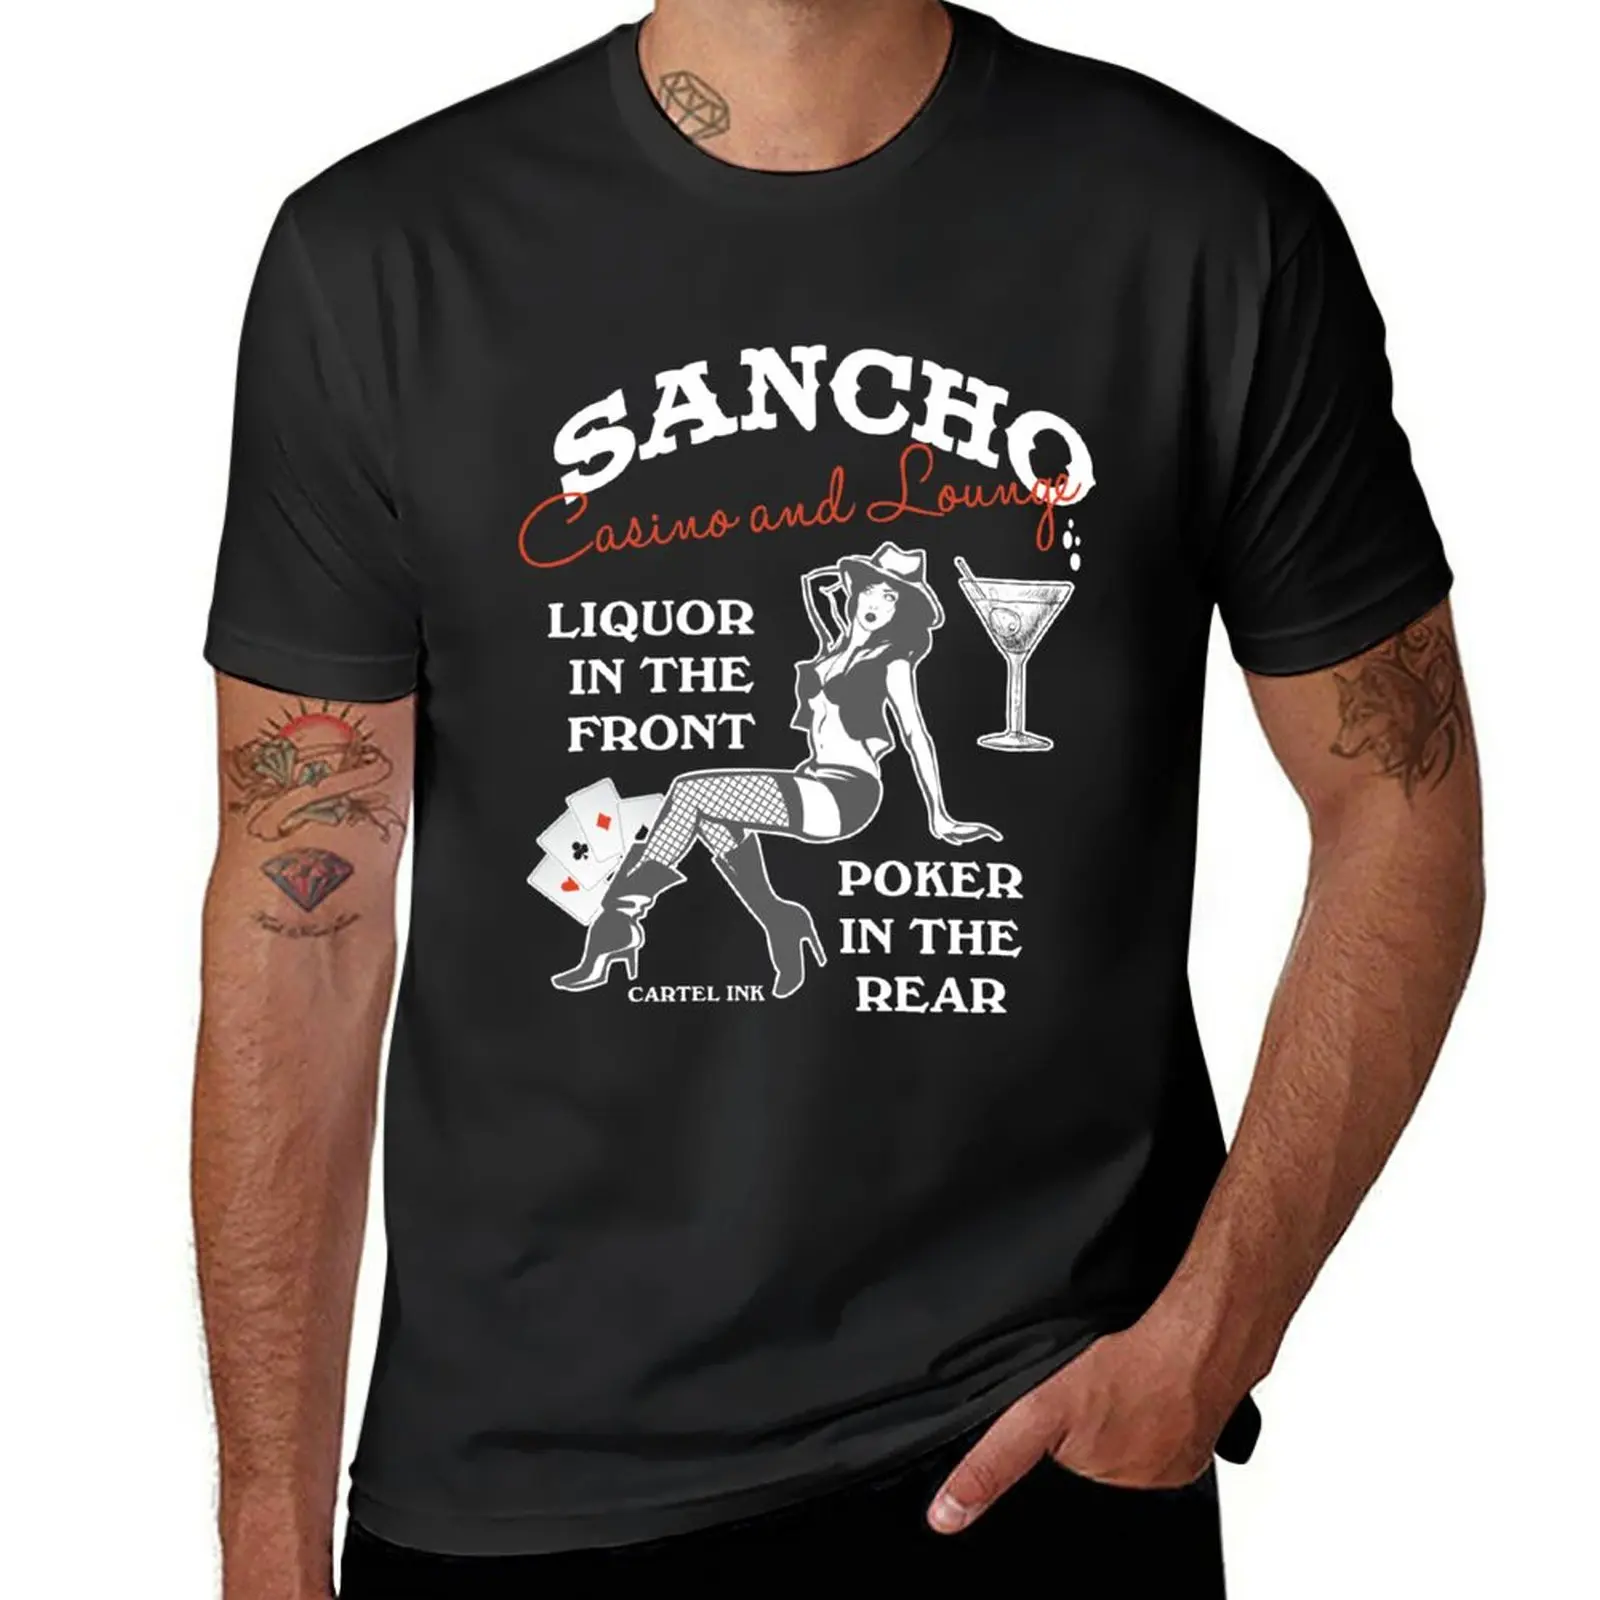 

New Sancho casino and lounge liquor in the front poker in the pear T-Shirt t-shirts man mens funny t shirts